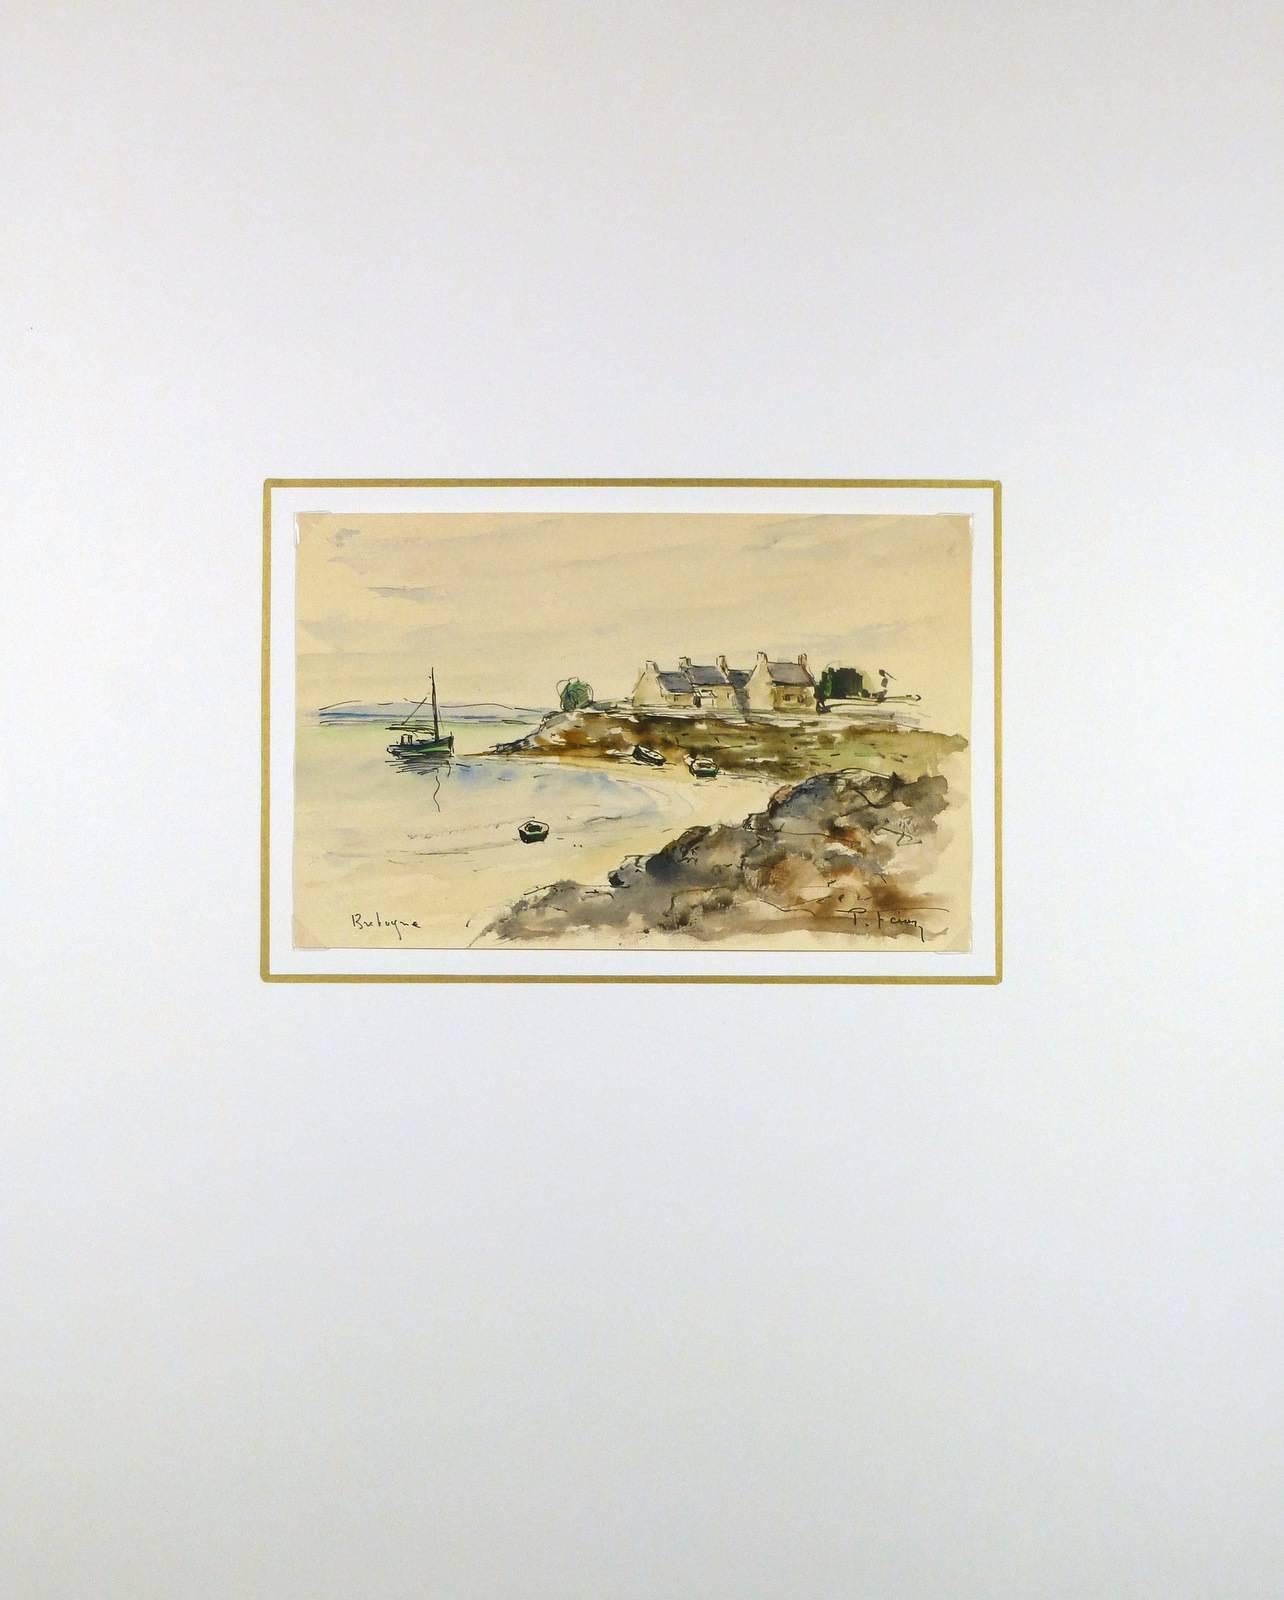 French watercolor with impressionistic brushstrokes and earthen tones, depicting a fishing village in Brittany, 1980. Title lower left and signed lower right.

Original artwork on paper displayed on a white mat with a gold border. Mat fits a